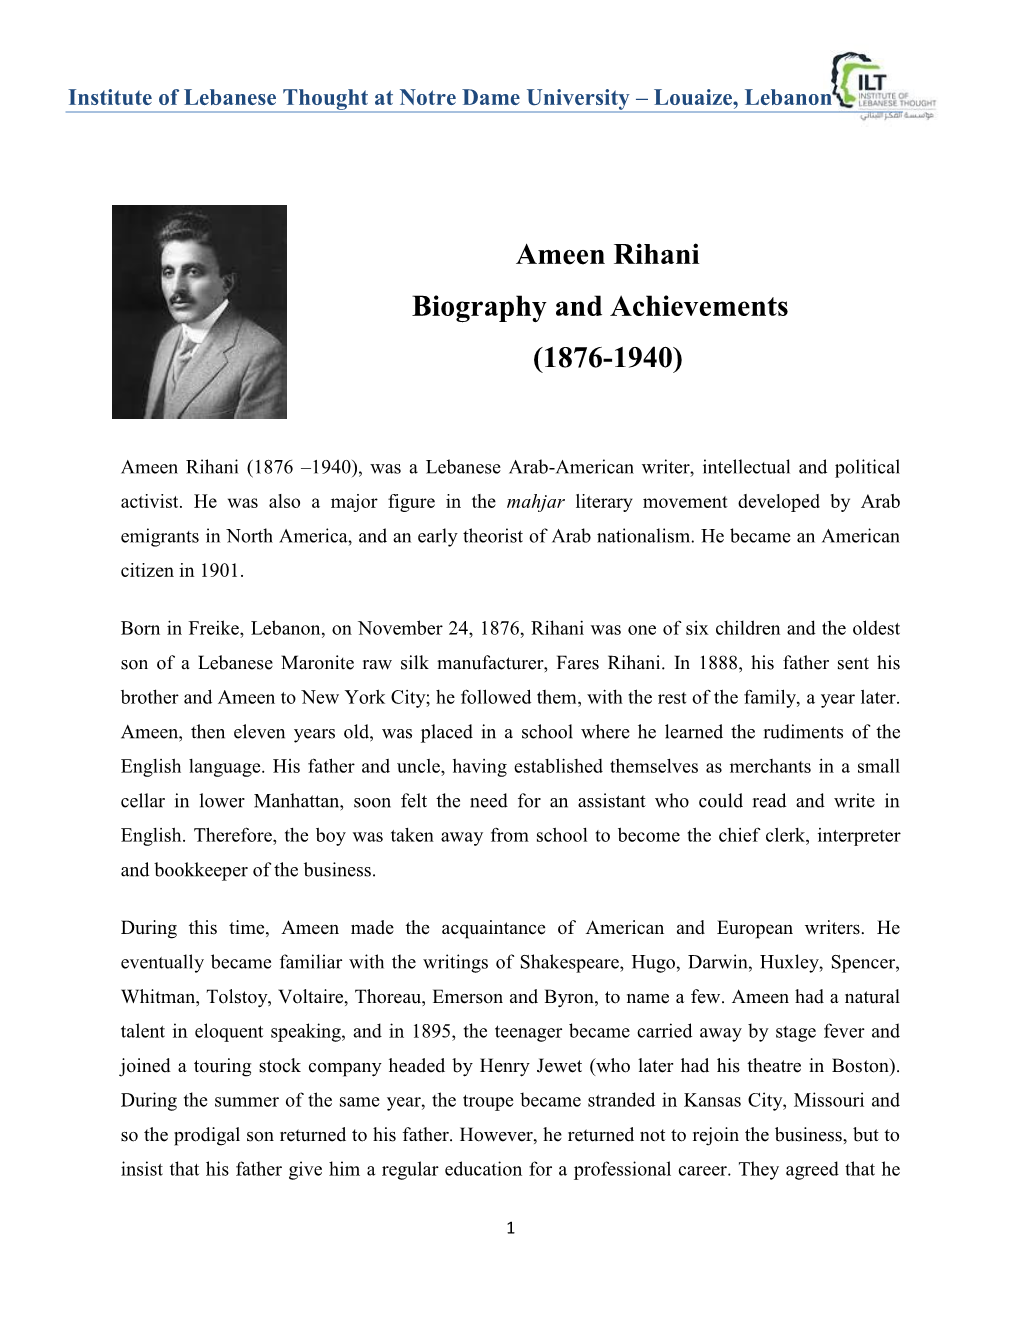 Ameen Rihani Biography and Achievements